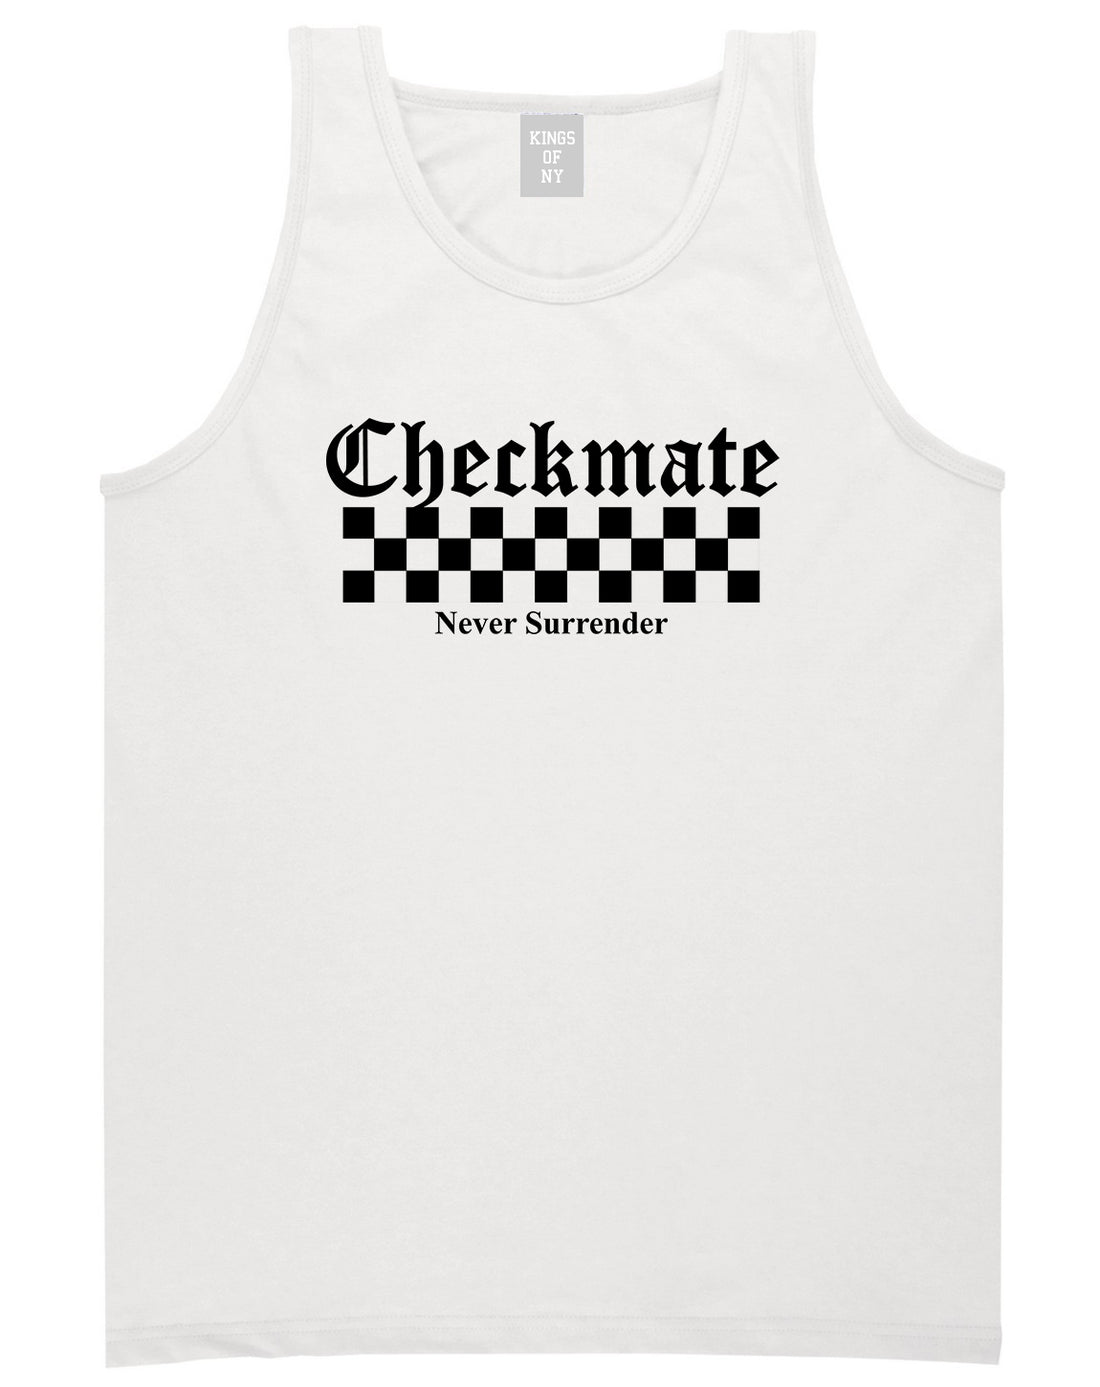 Checkmate Never Surrender Chess Mens Tank Top T-Shirt White